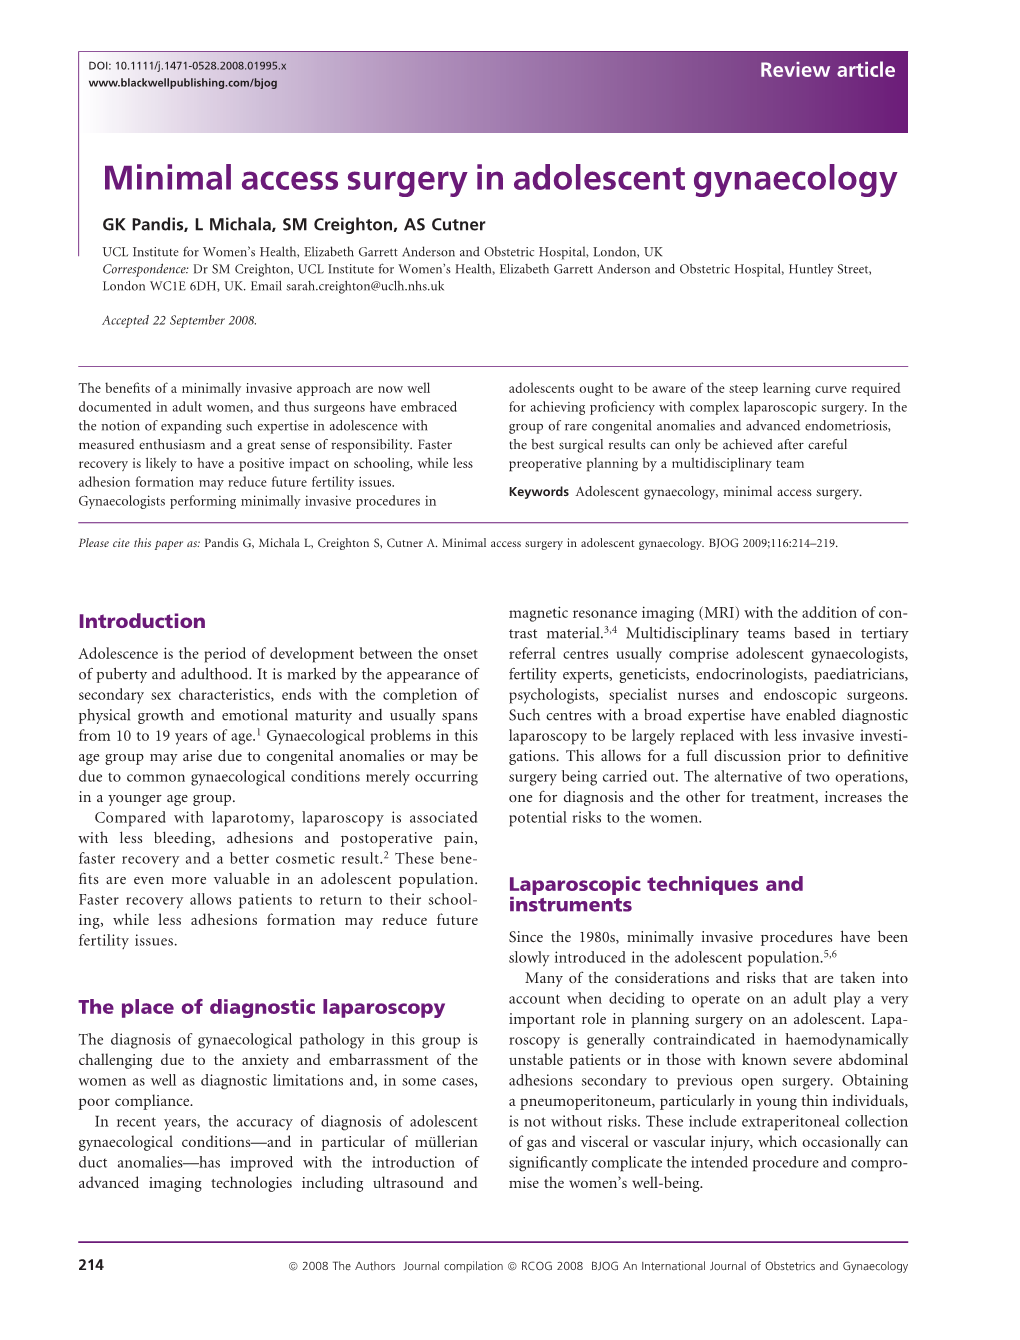 Minimal Access Surgery in Adolescent Gynaecology